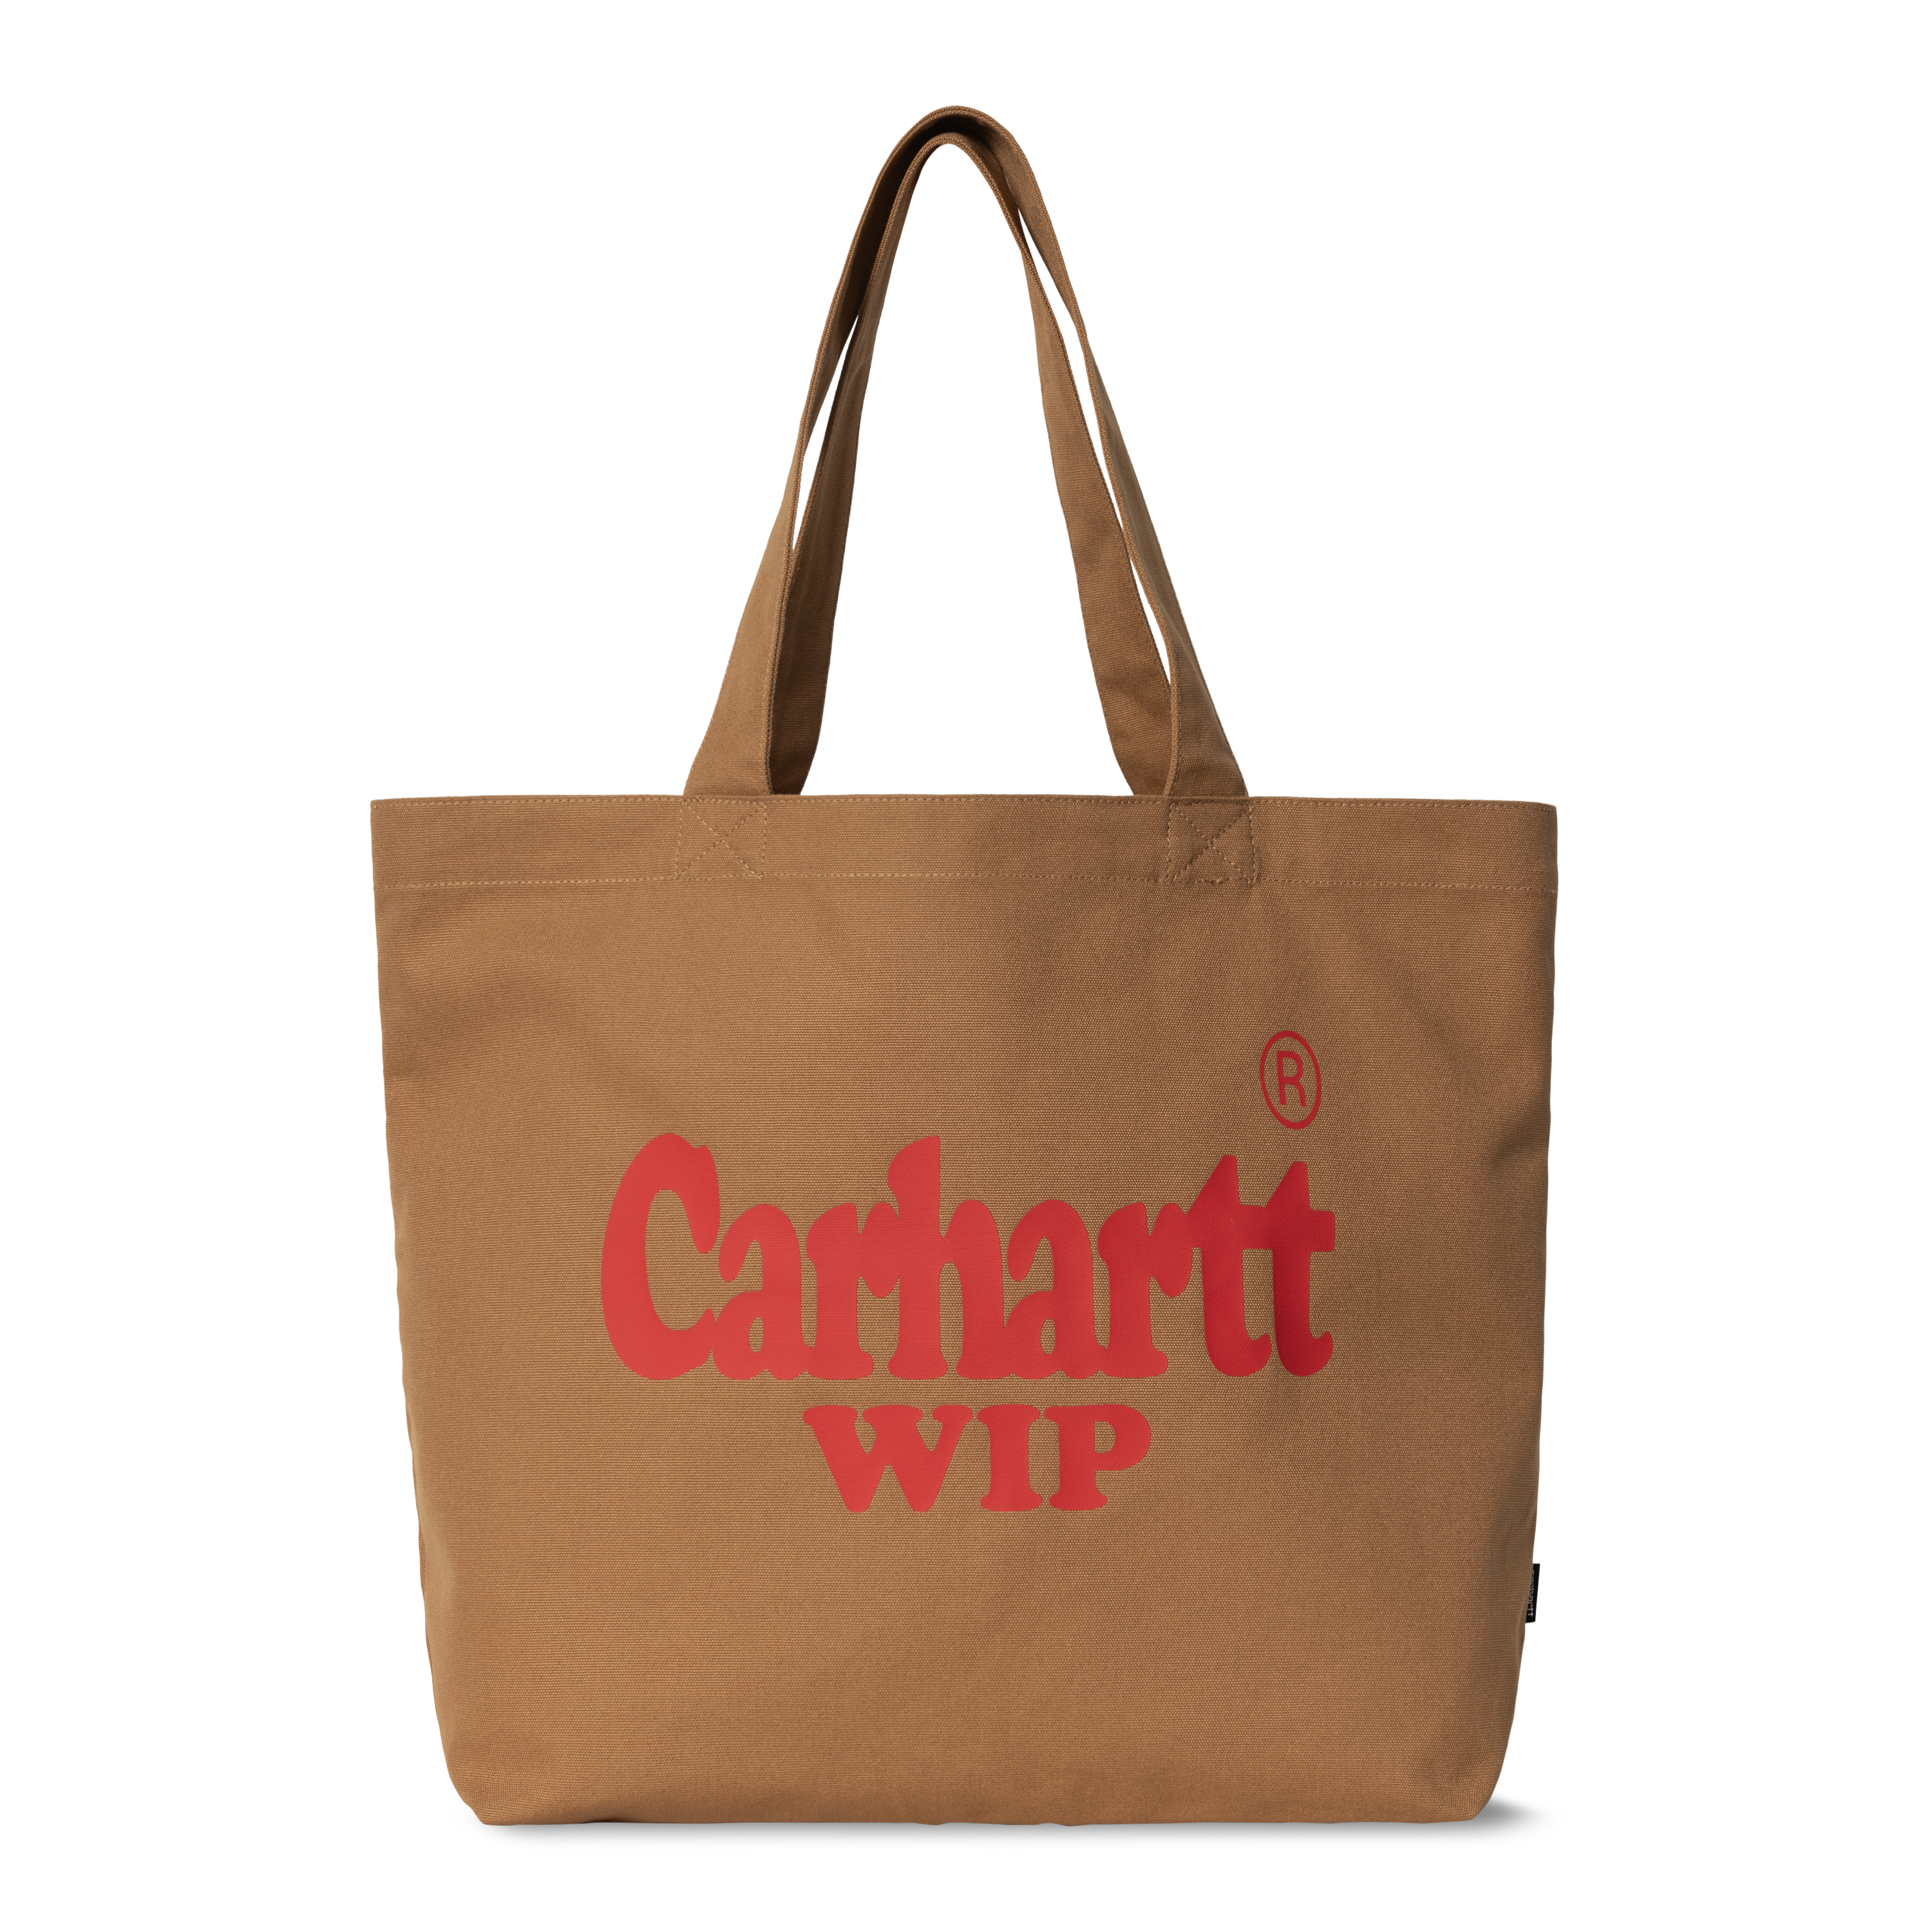 Carhartt WIP Canvas Graphic Tote Large in Brown